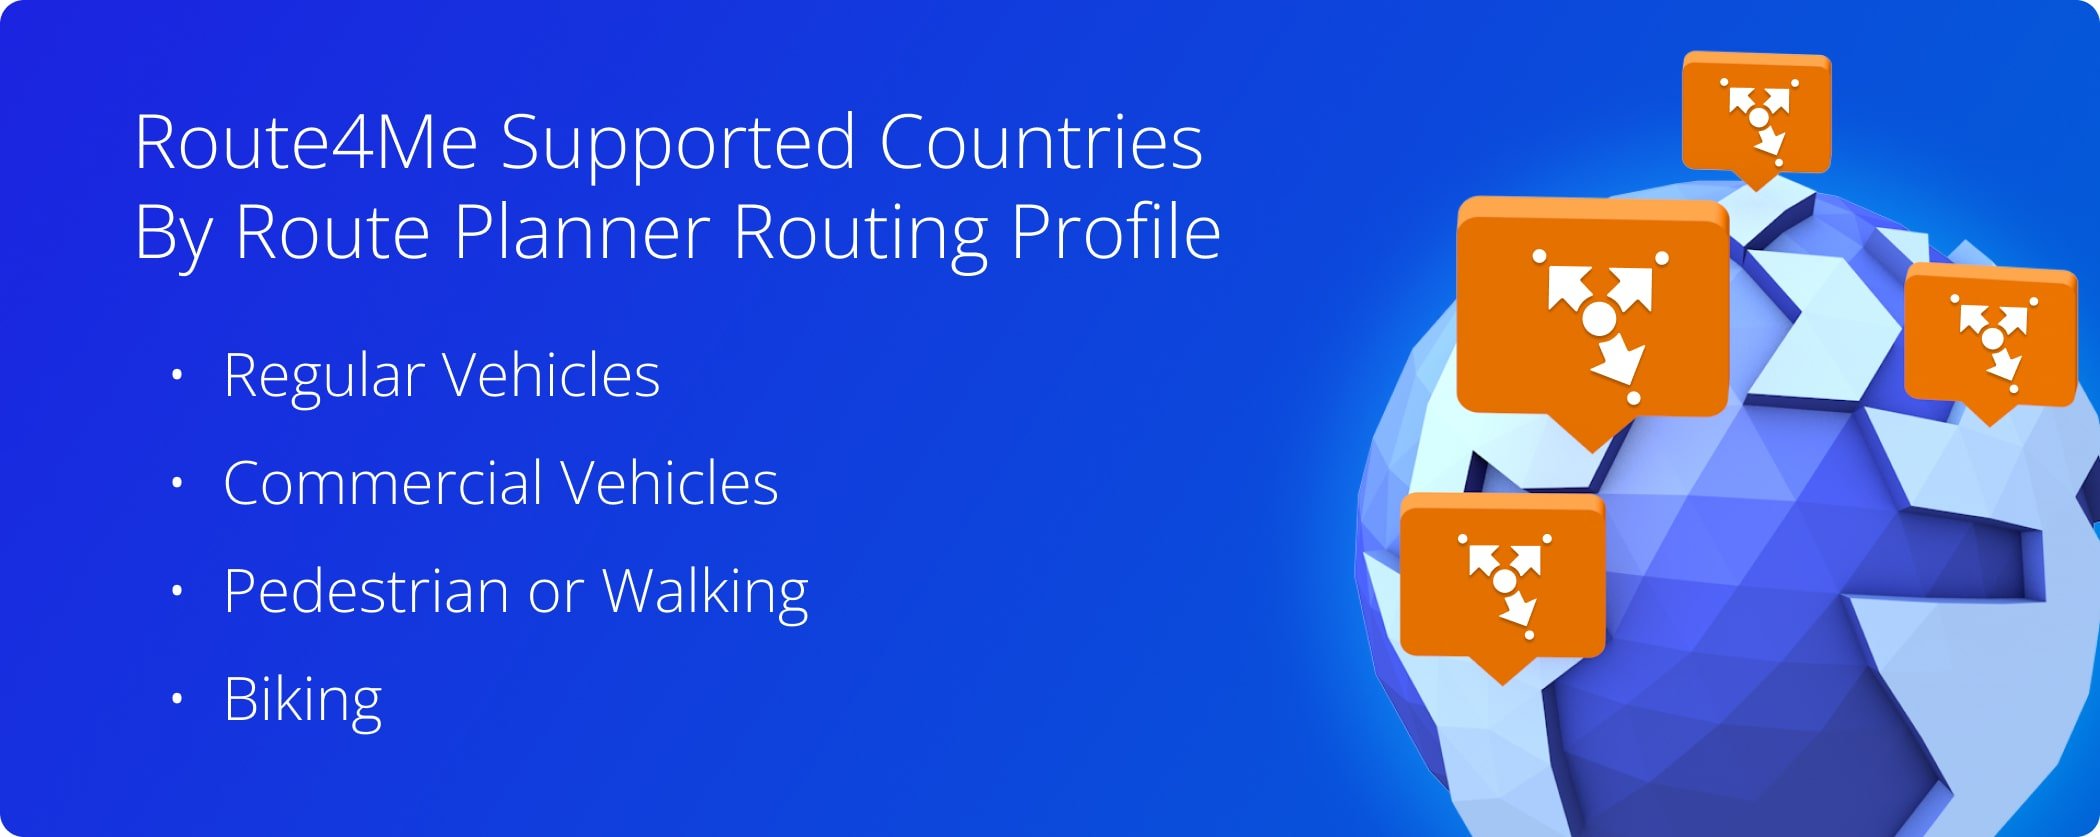 Route4Me Supported Countries By Route Planner Routing Profile Type